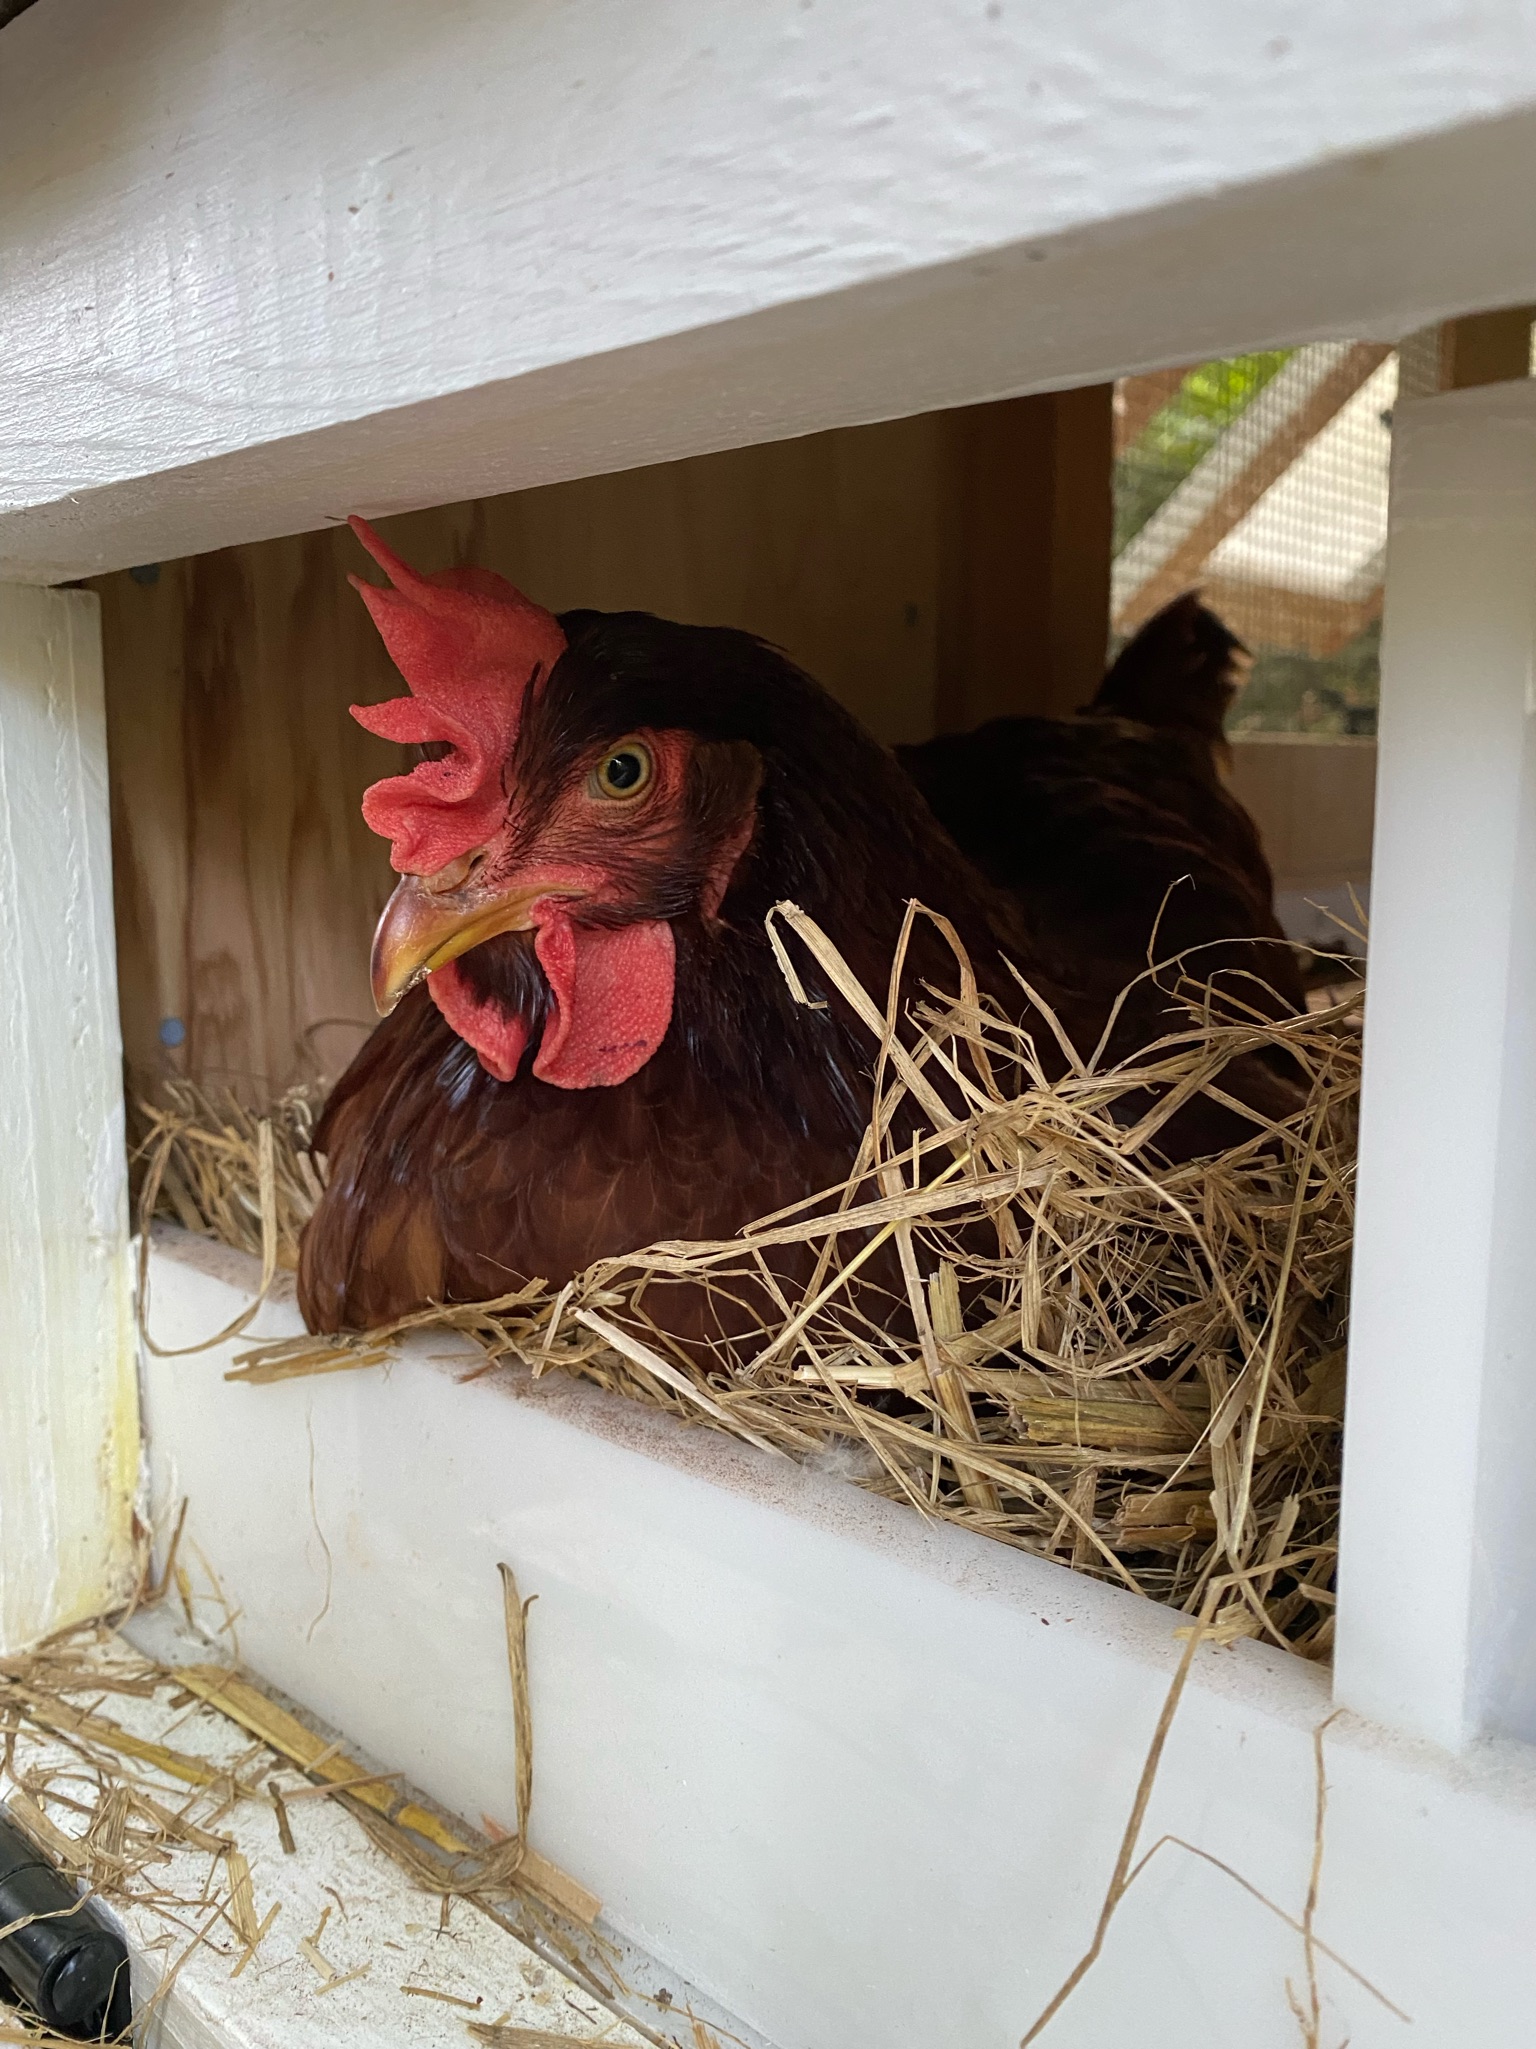 Hens may sleep in nesting boxes if they're accessible from the henhouse.